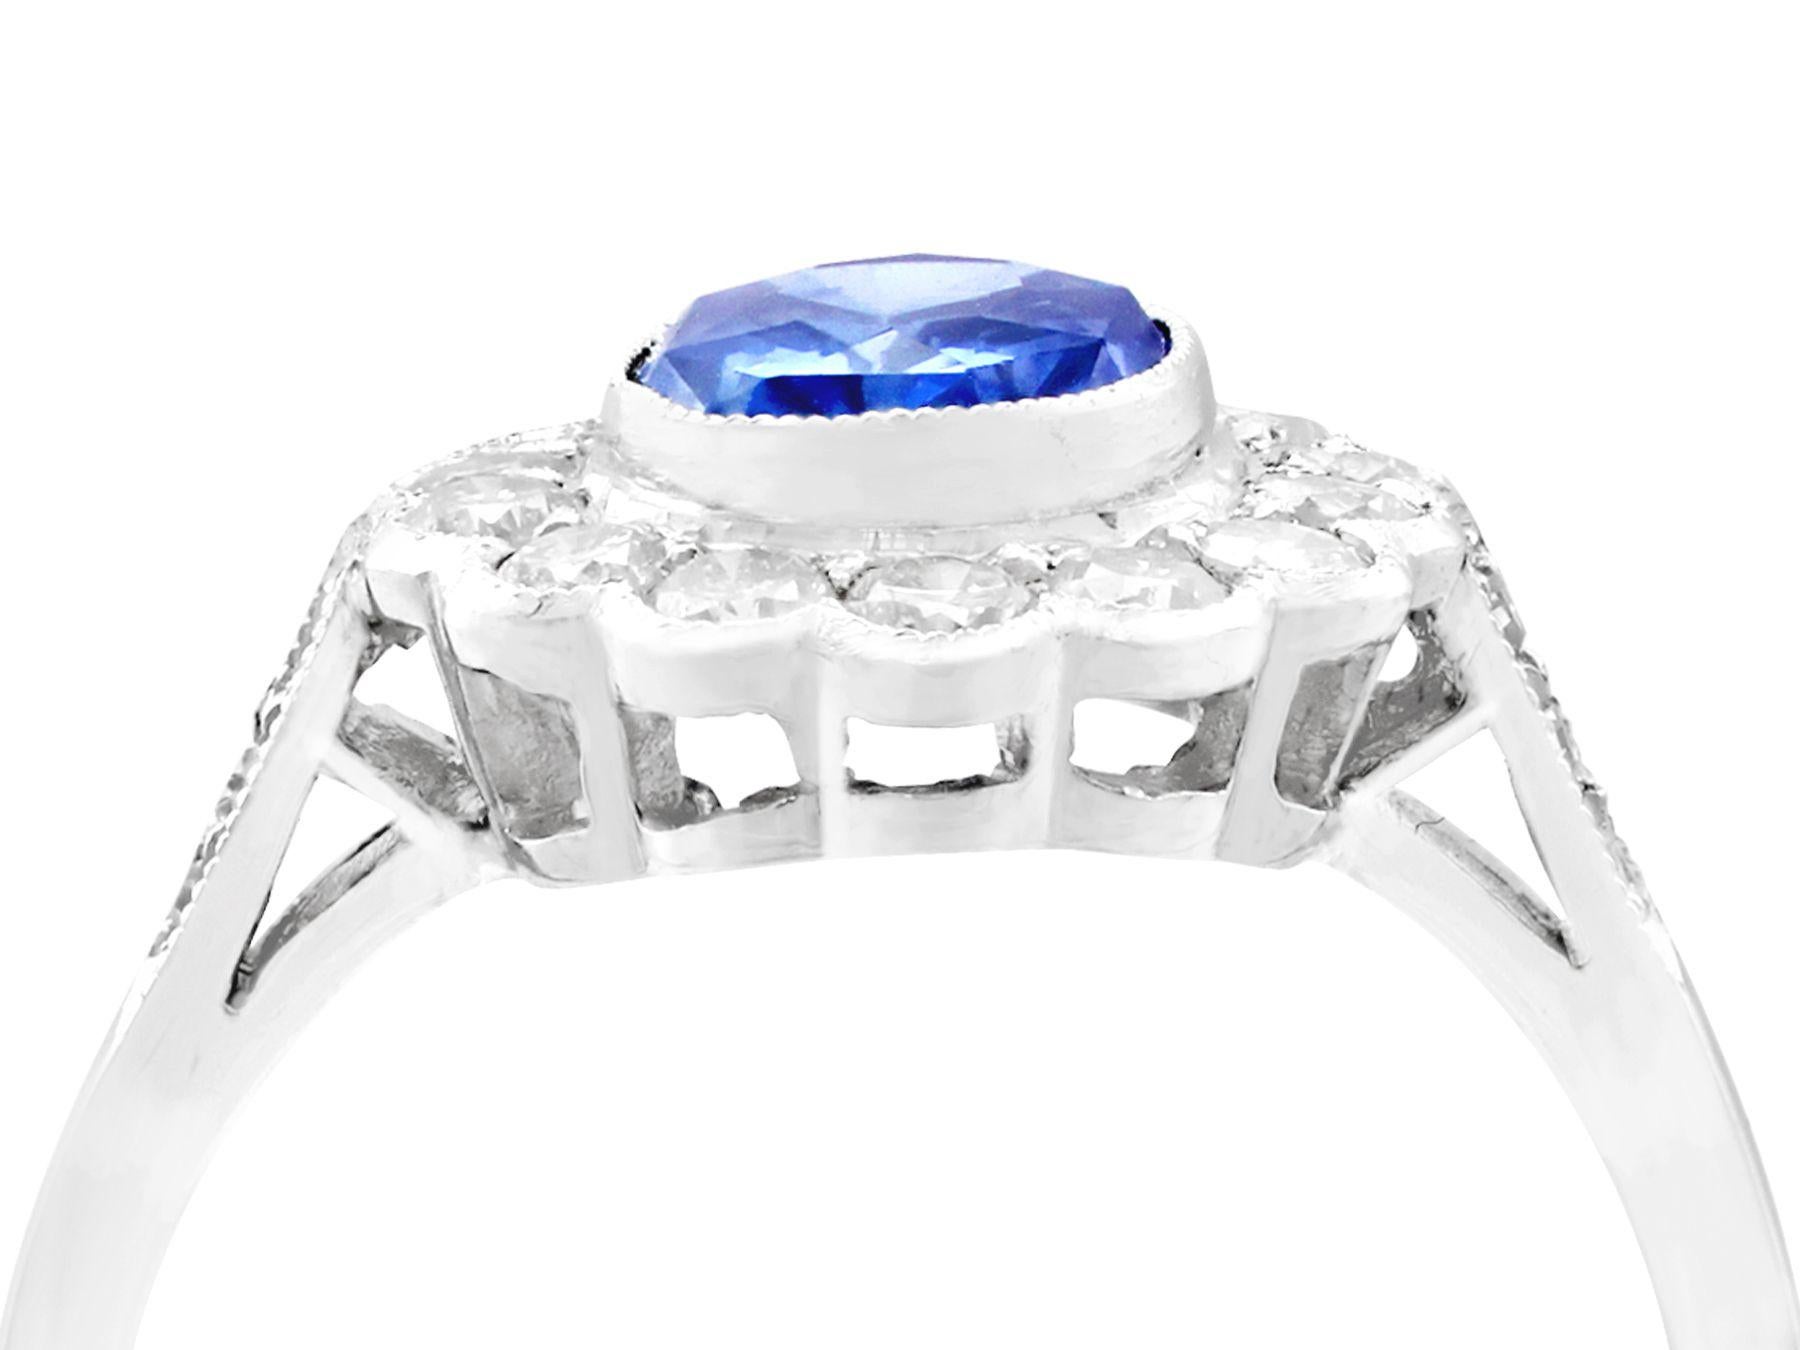 A stunning, fine and impressive 1.29 Carat blue sapphire, 0.56 Carat diamond, and platinum dress ring; part of our diverse vintage jewelry collections.

This stunning, fine and impressive sapphire ring has been crafted in platinum.

The pierced